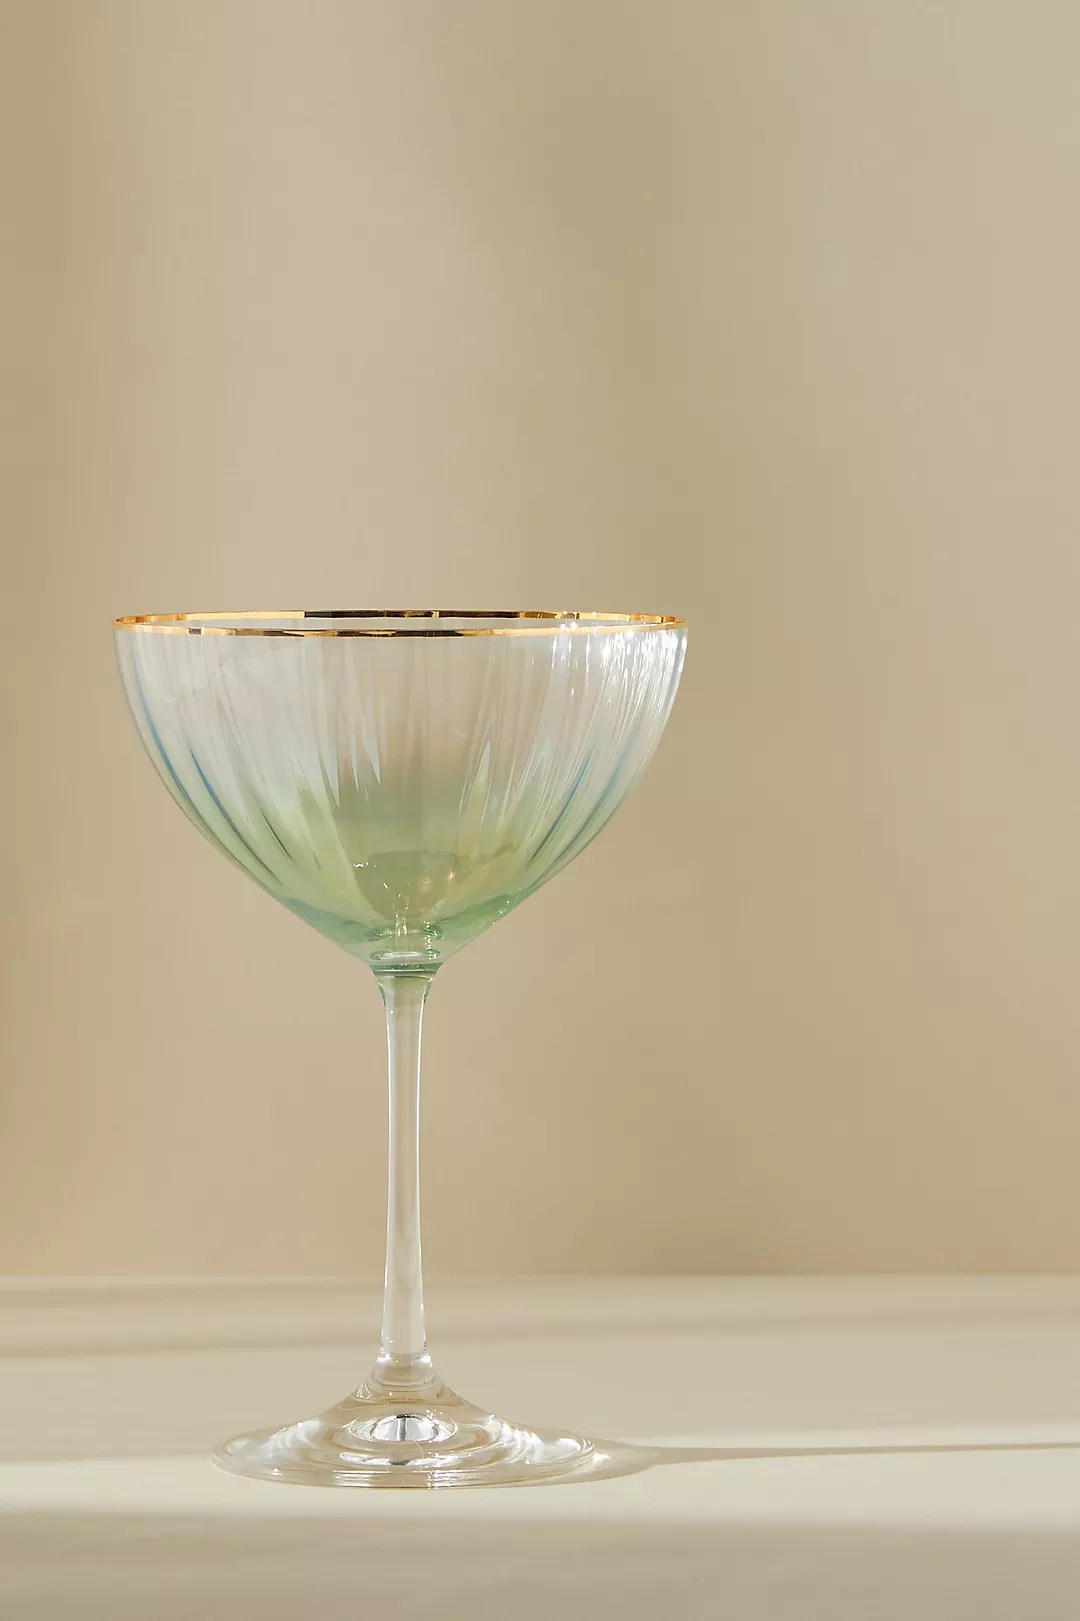 waterfall coupe glass with a gold rim and green tint on a beige background